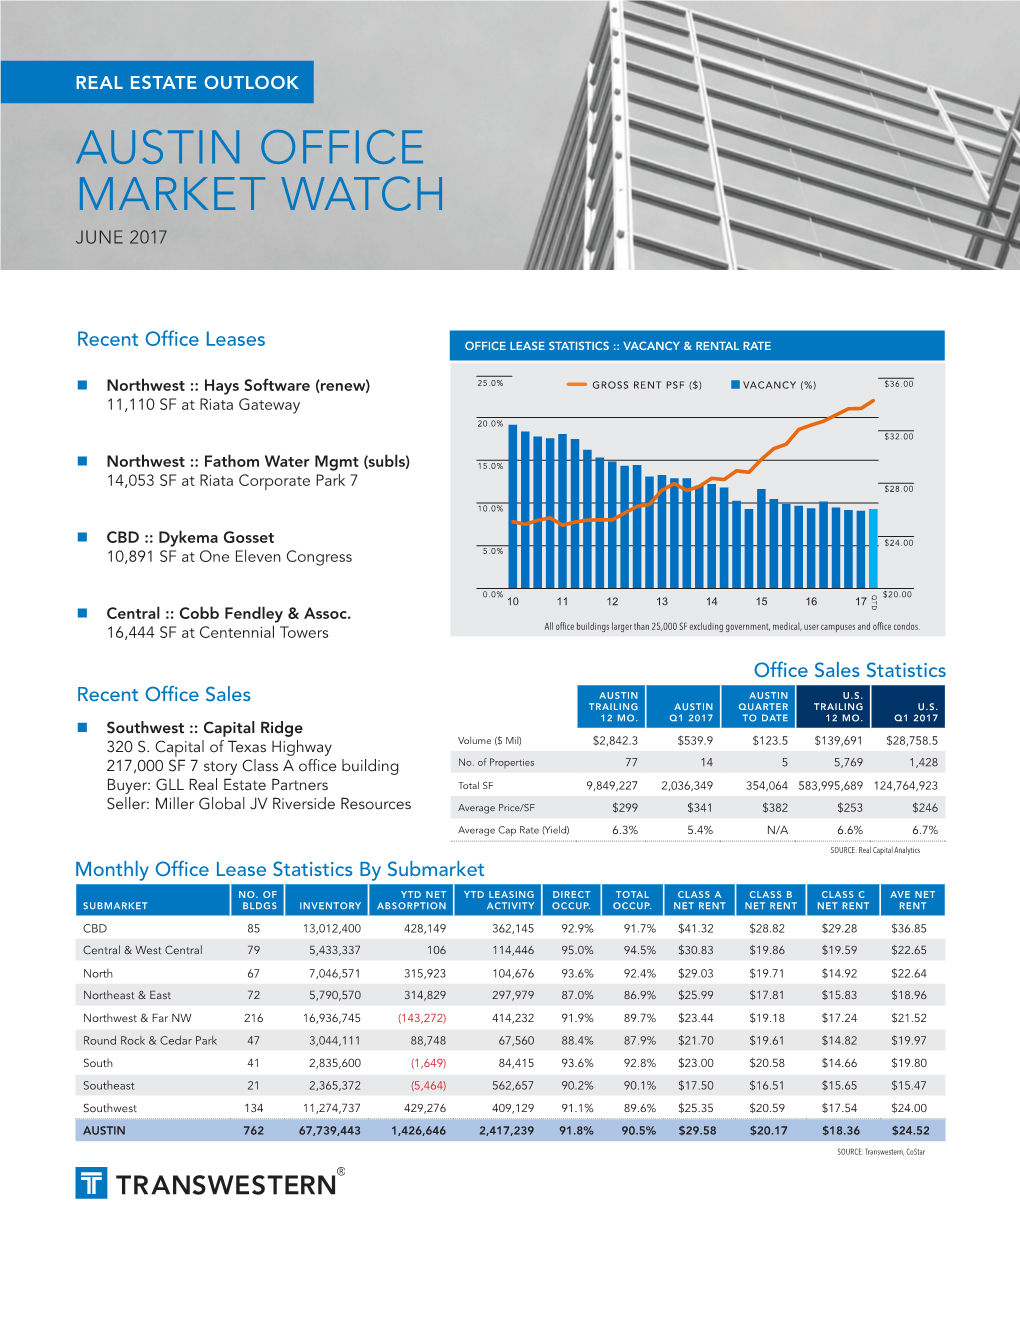 Austin Office MARKETWATCH Report Is a Monthly Report Prepared by Transwestern That Tracks Market Statistics for the Austin MSA